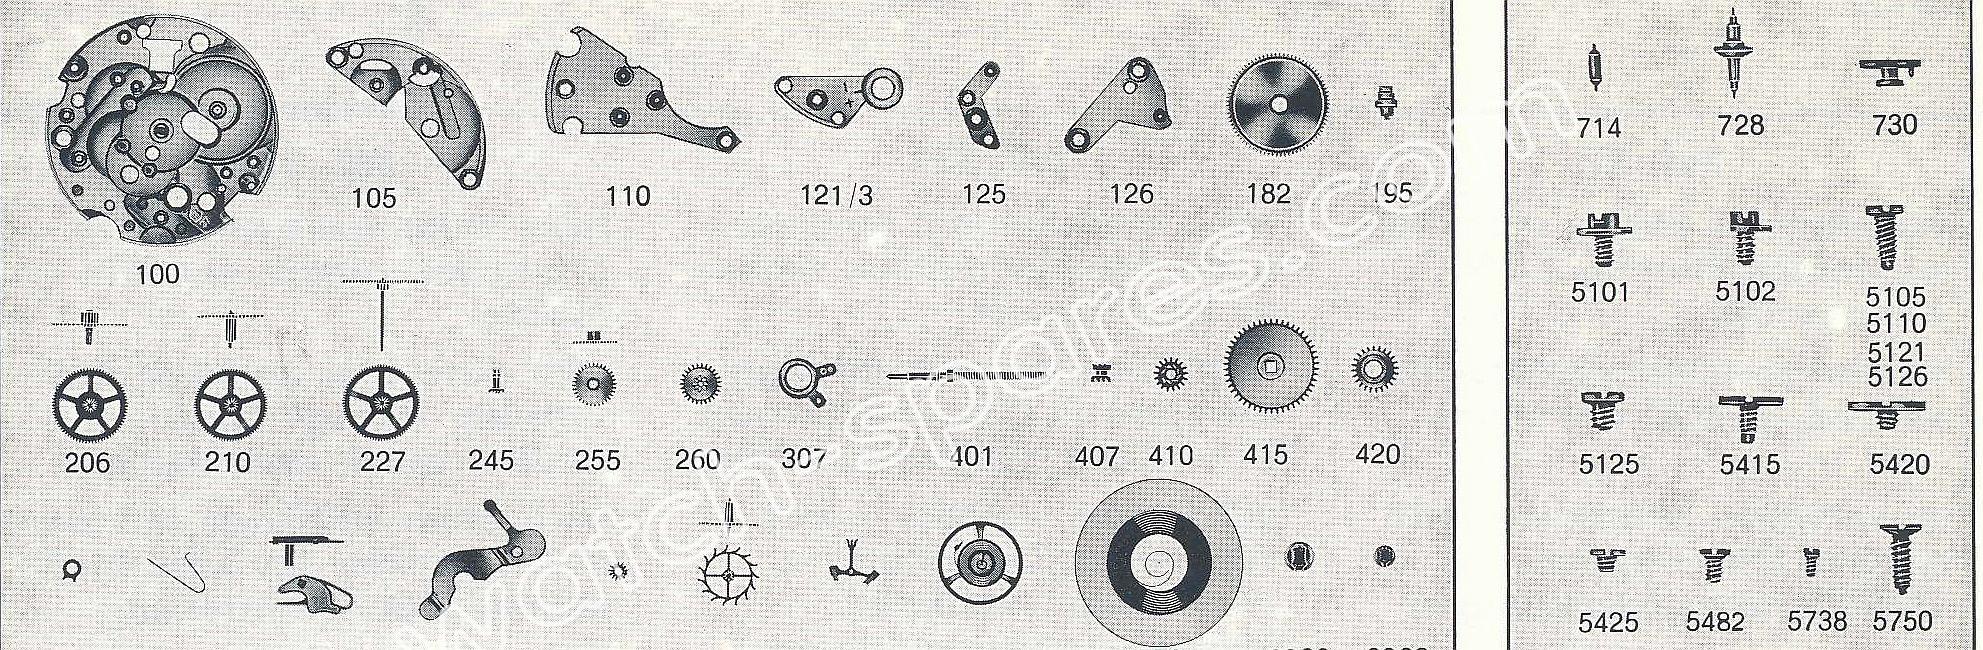 FHF Font 37 watch spare parts